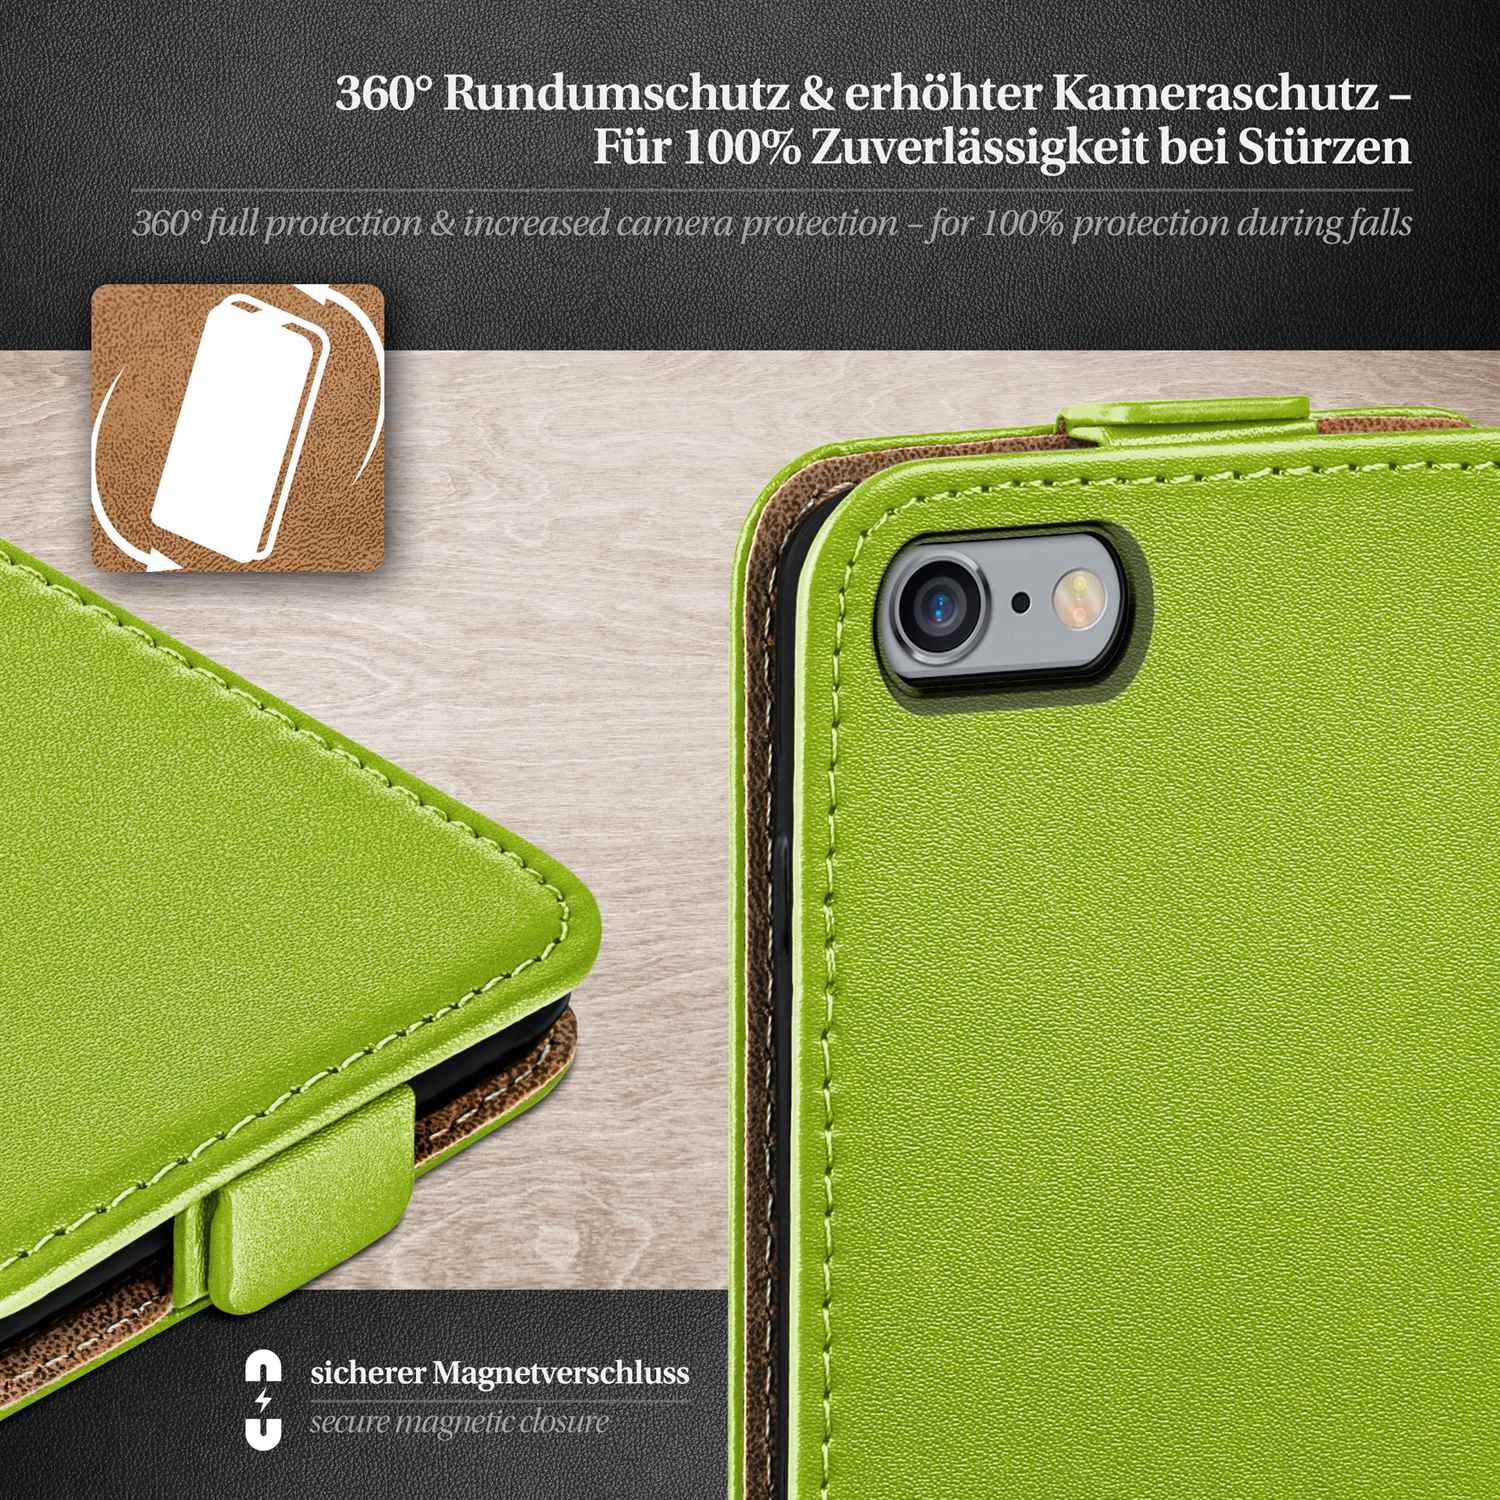 MOEX Flip Lime-Green Flip 6s, iPhone Case, Cover, Apple